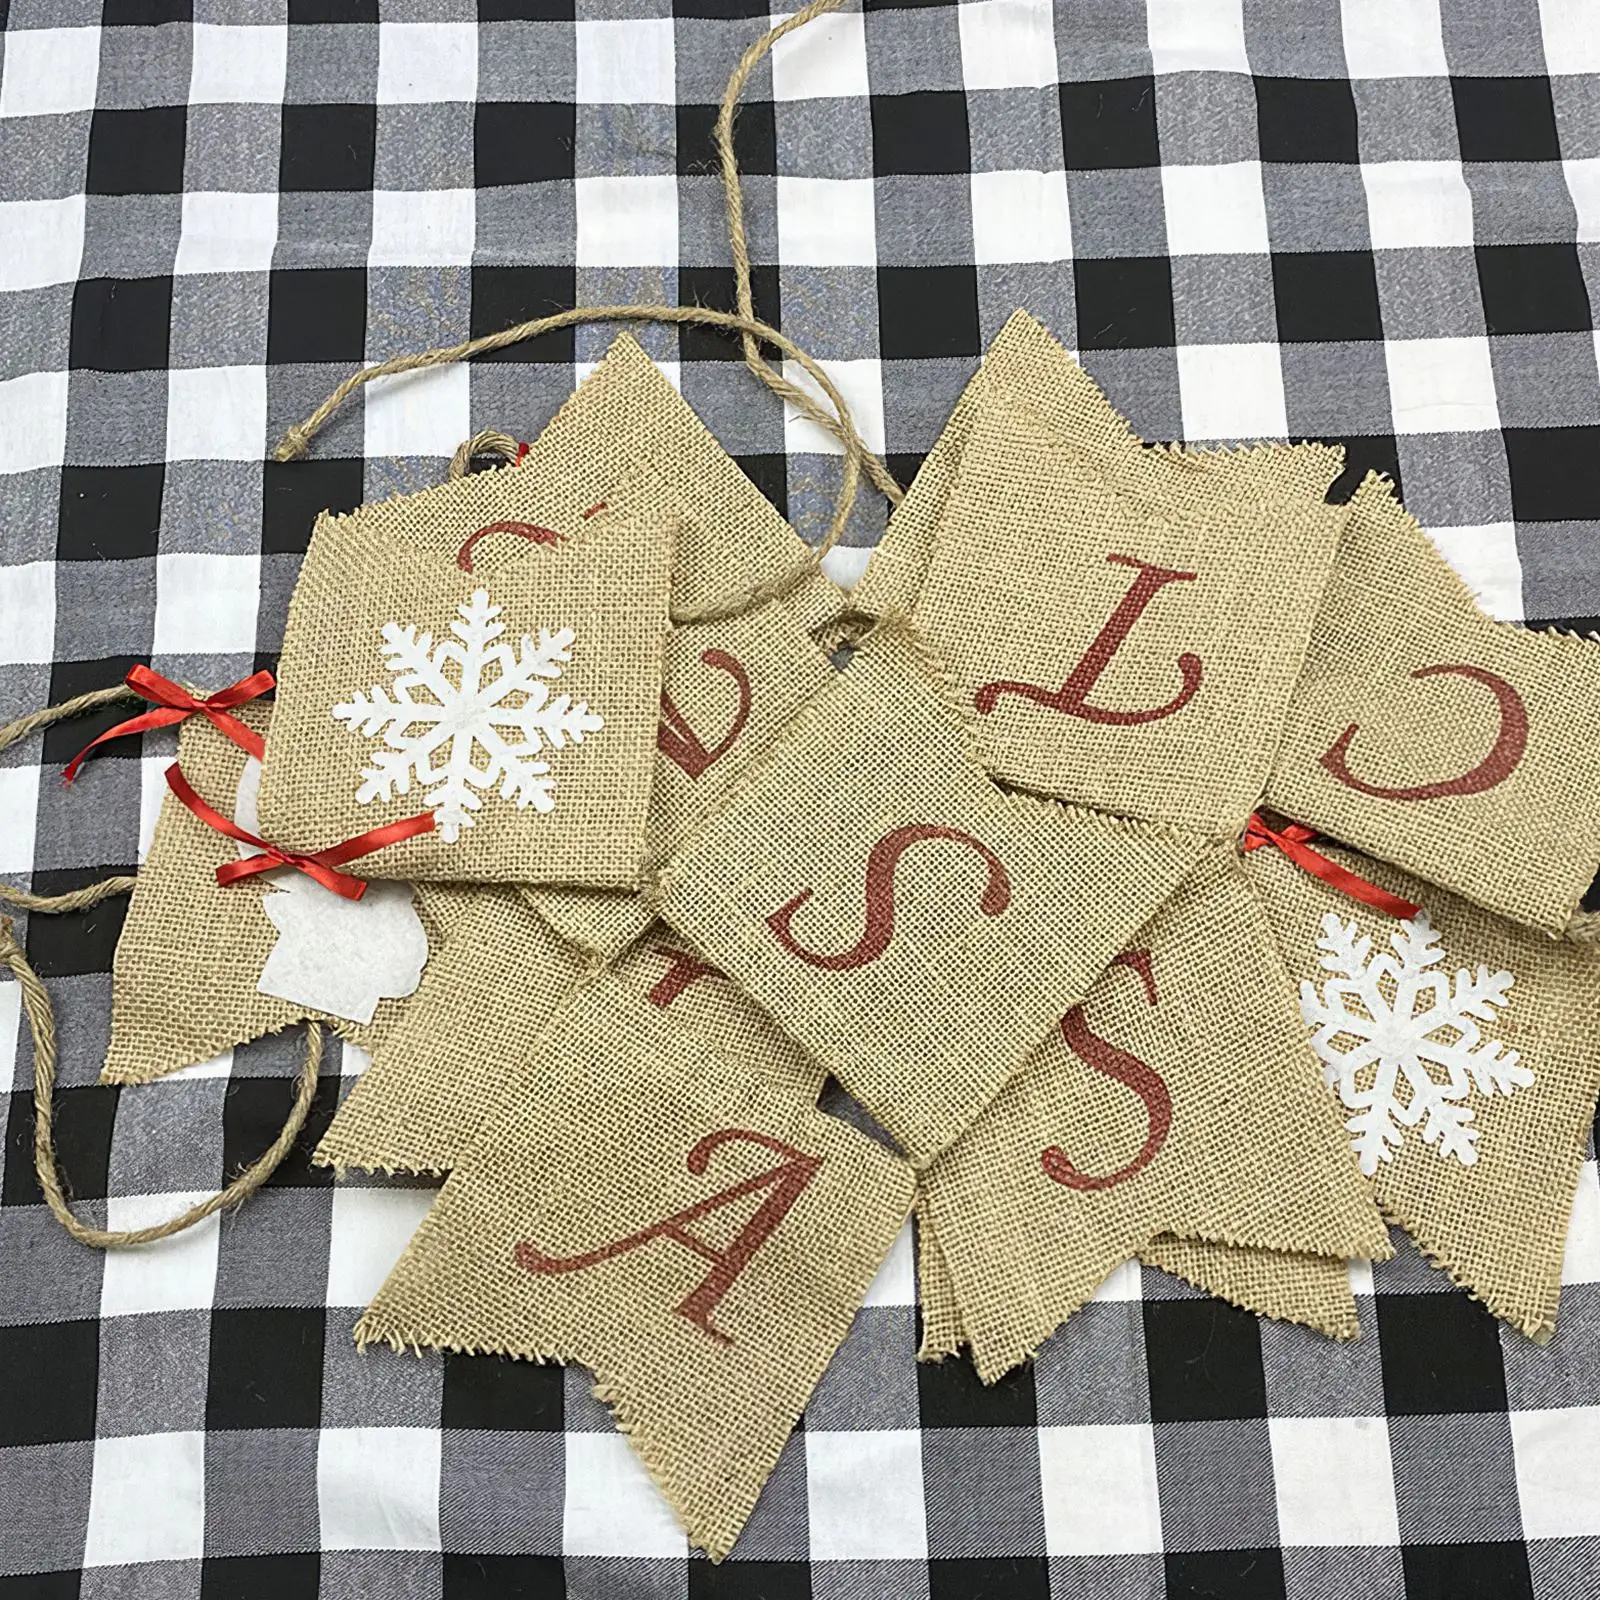 

Merry Christmas Burlap Banner Fabric Hanging Festival Banner With Bows Xmas Decor For Home Outdoor Banners Navidad New Year Gift